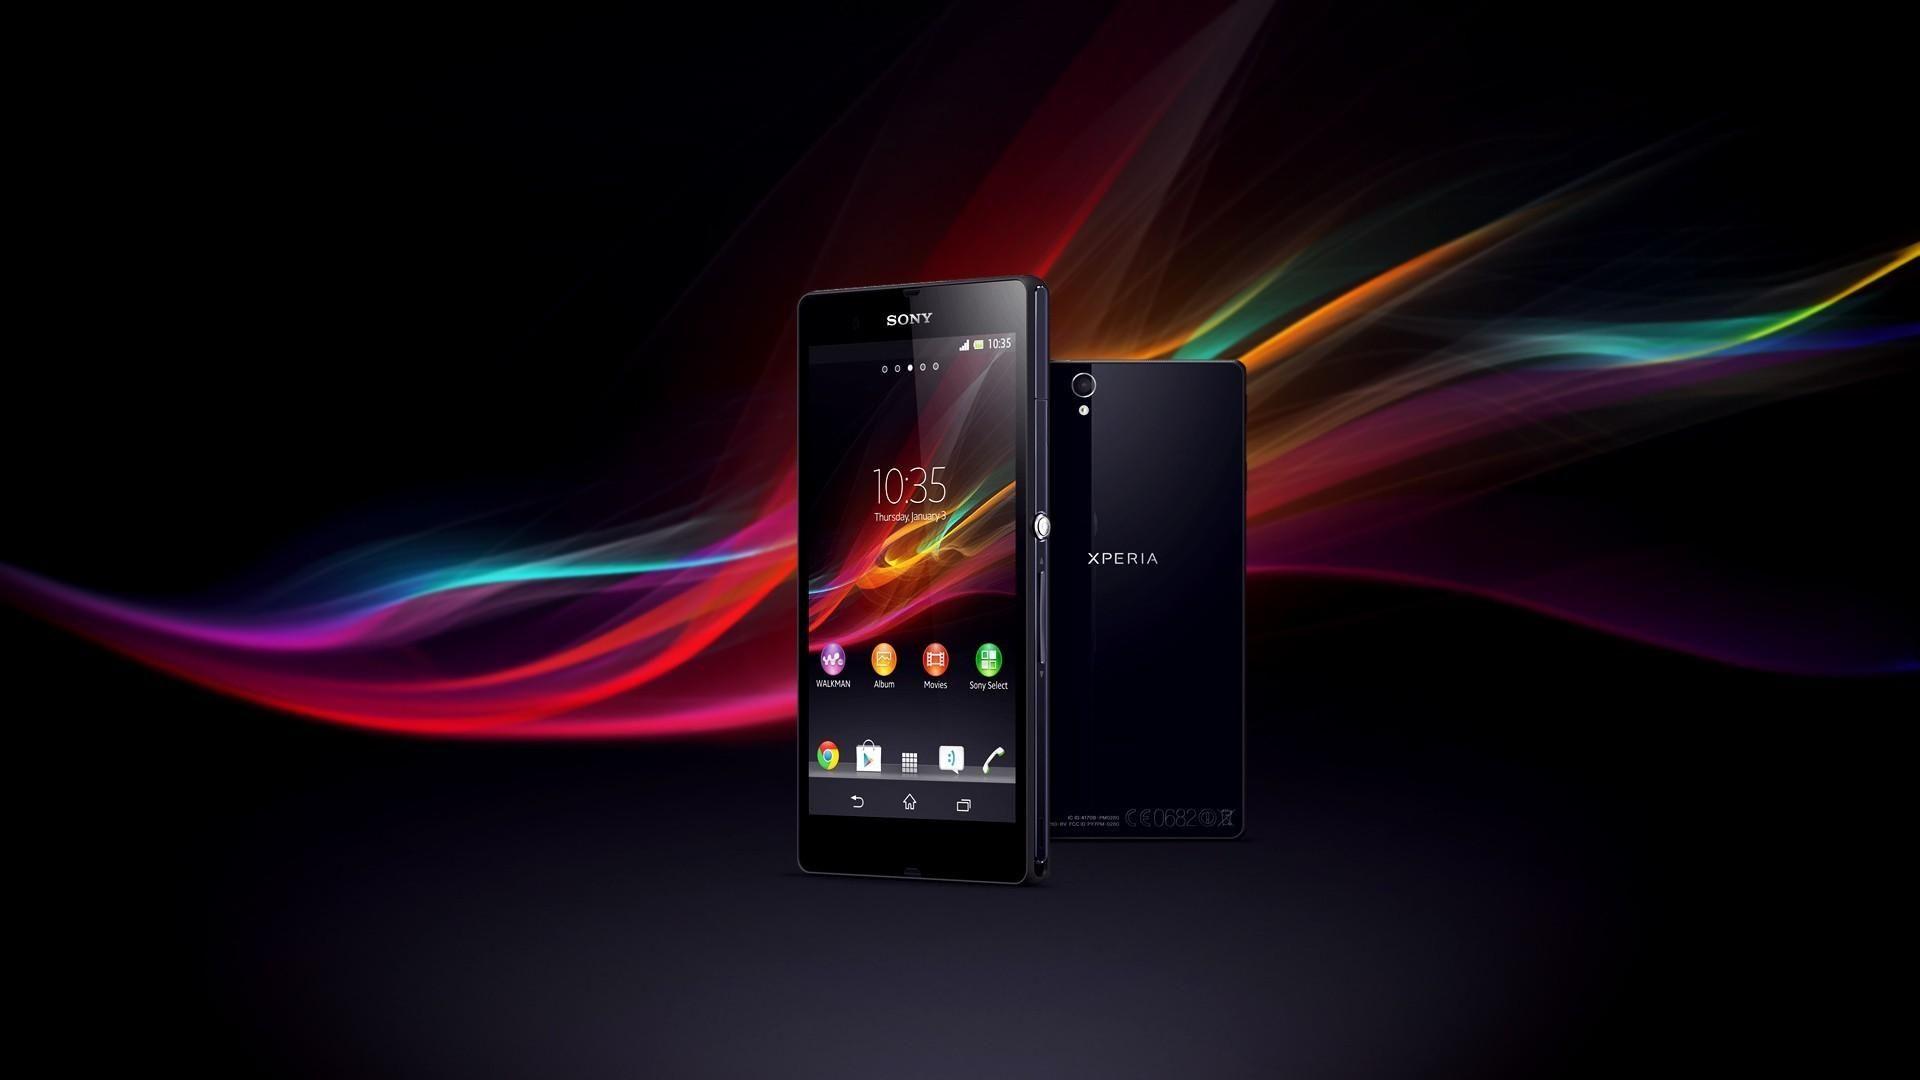 Wallpapers for Sony Xperia Z5 bởi wallpaper aesthetichd wallpapersblack  wallpaper  Android Ứng dụng  AppAgg